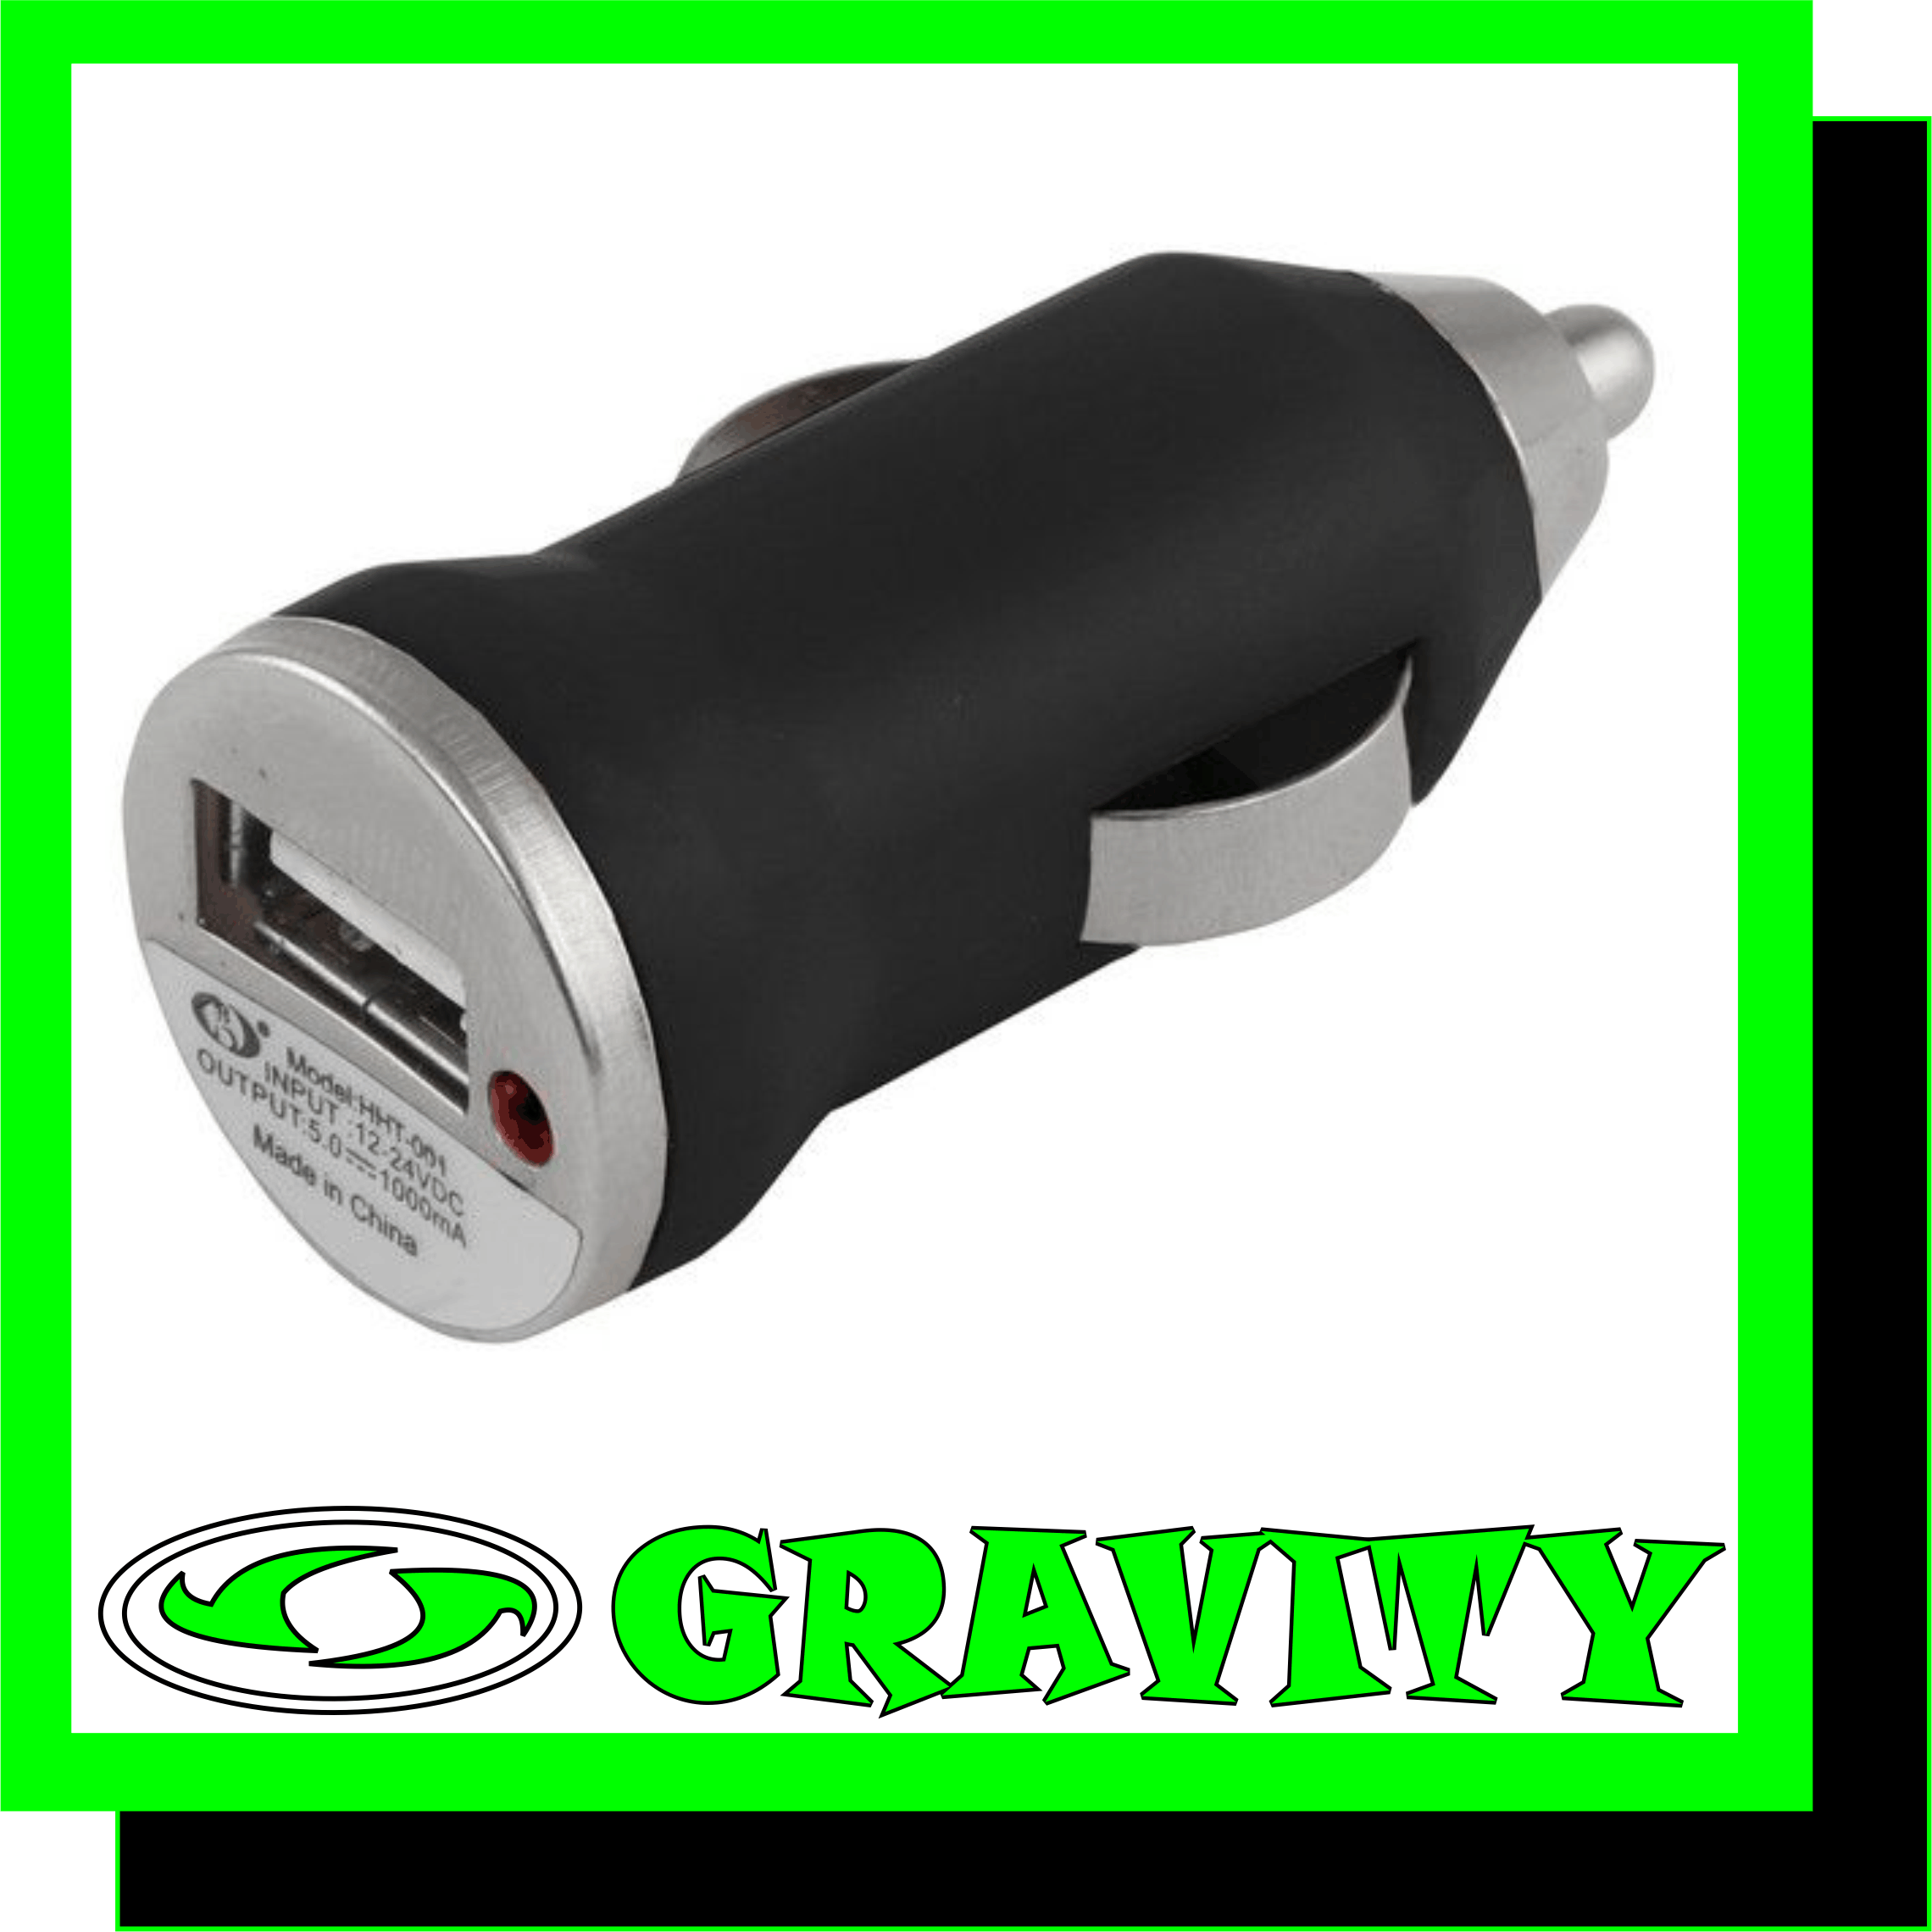 Car Lighter Usb Charger  Specifications: - Colour(s): Black - 5v lA - Material: Plastic - Size: 5.5 (l) x 2.3 (w)  - Charges digital products through car lighter - Single USB connection